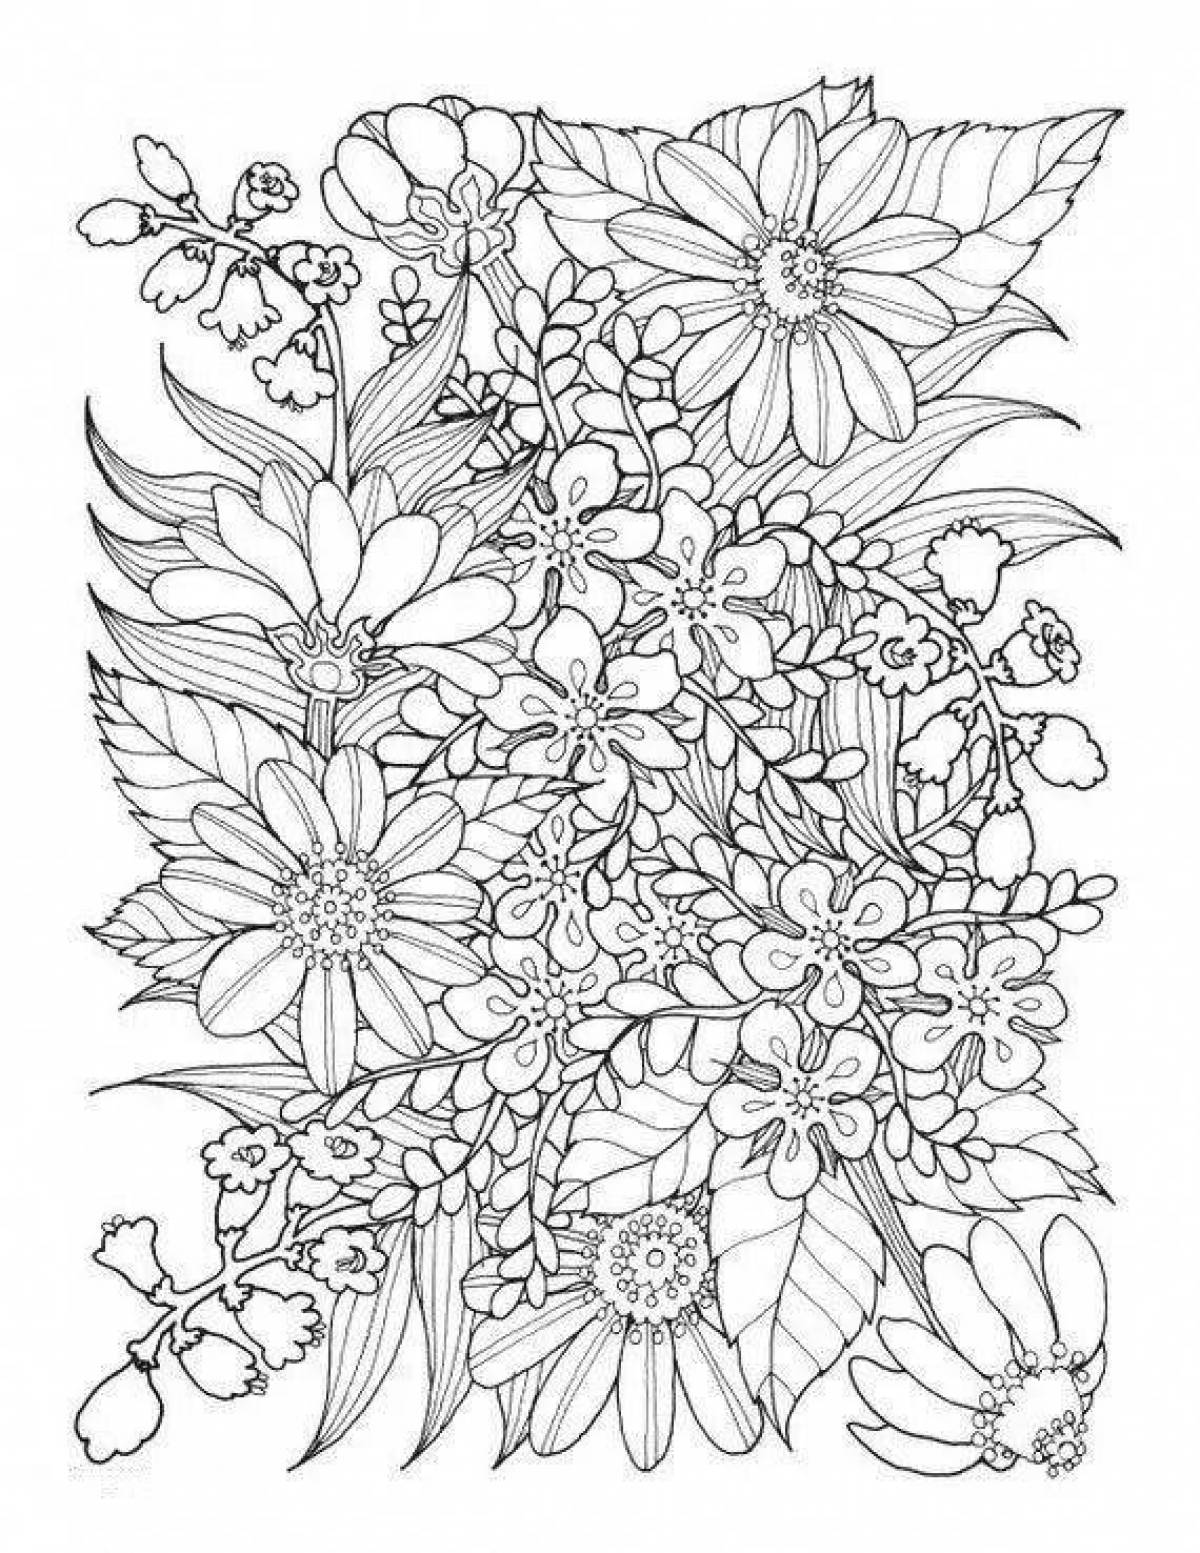 Exquisite intricate flower coloring book